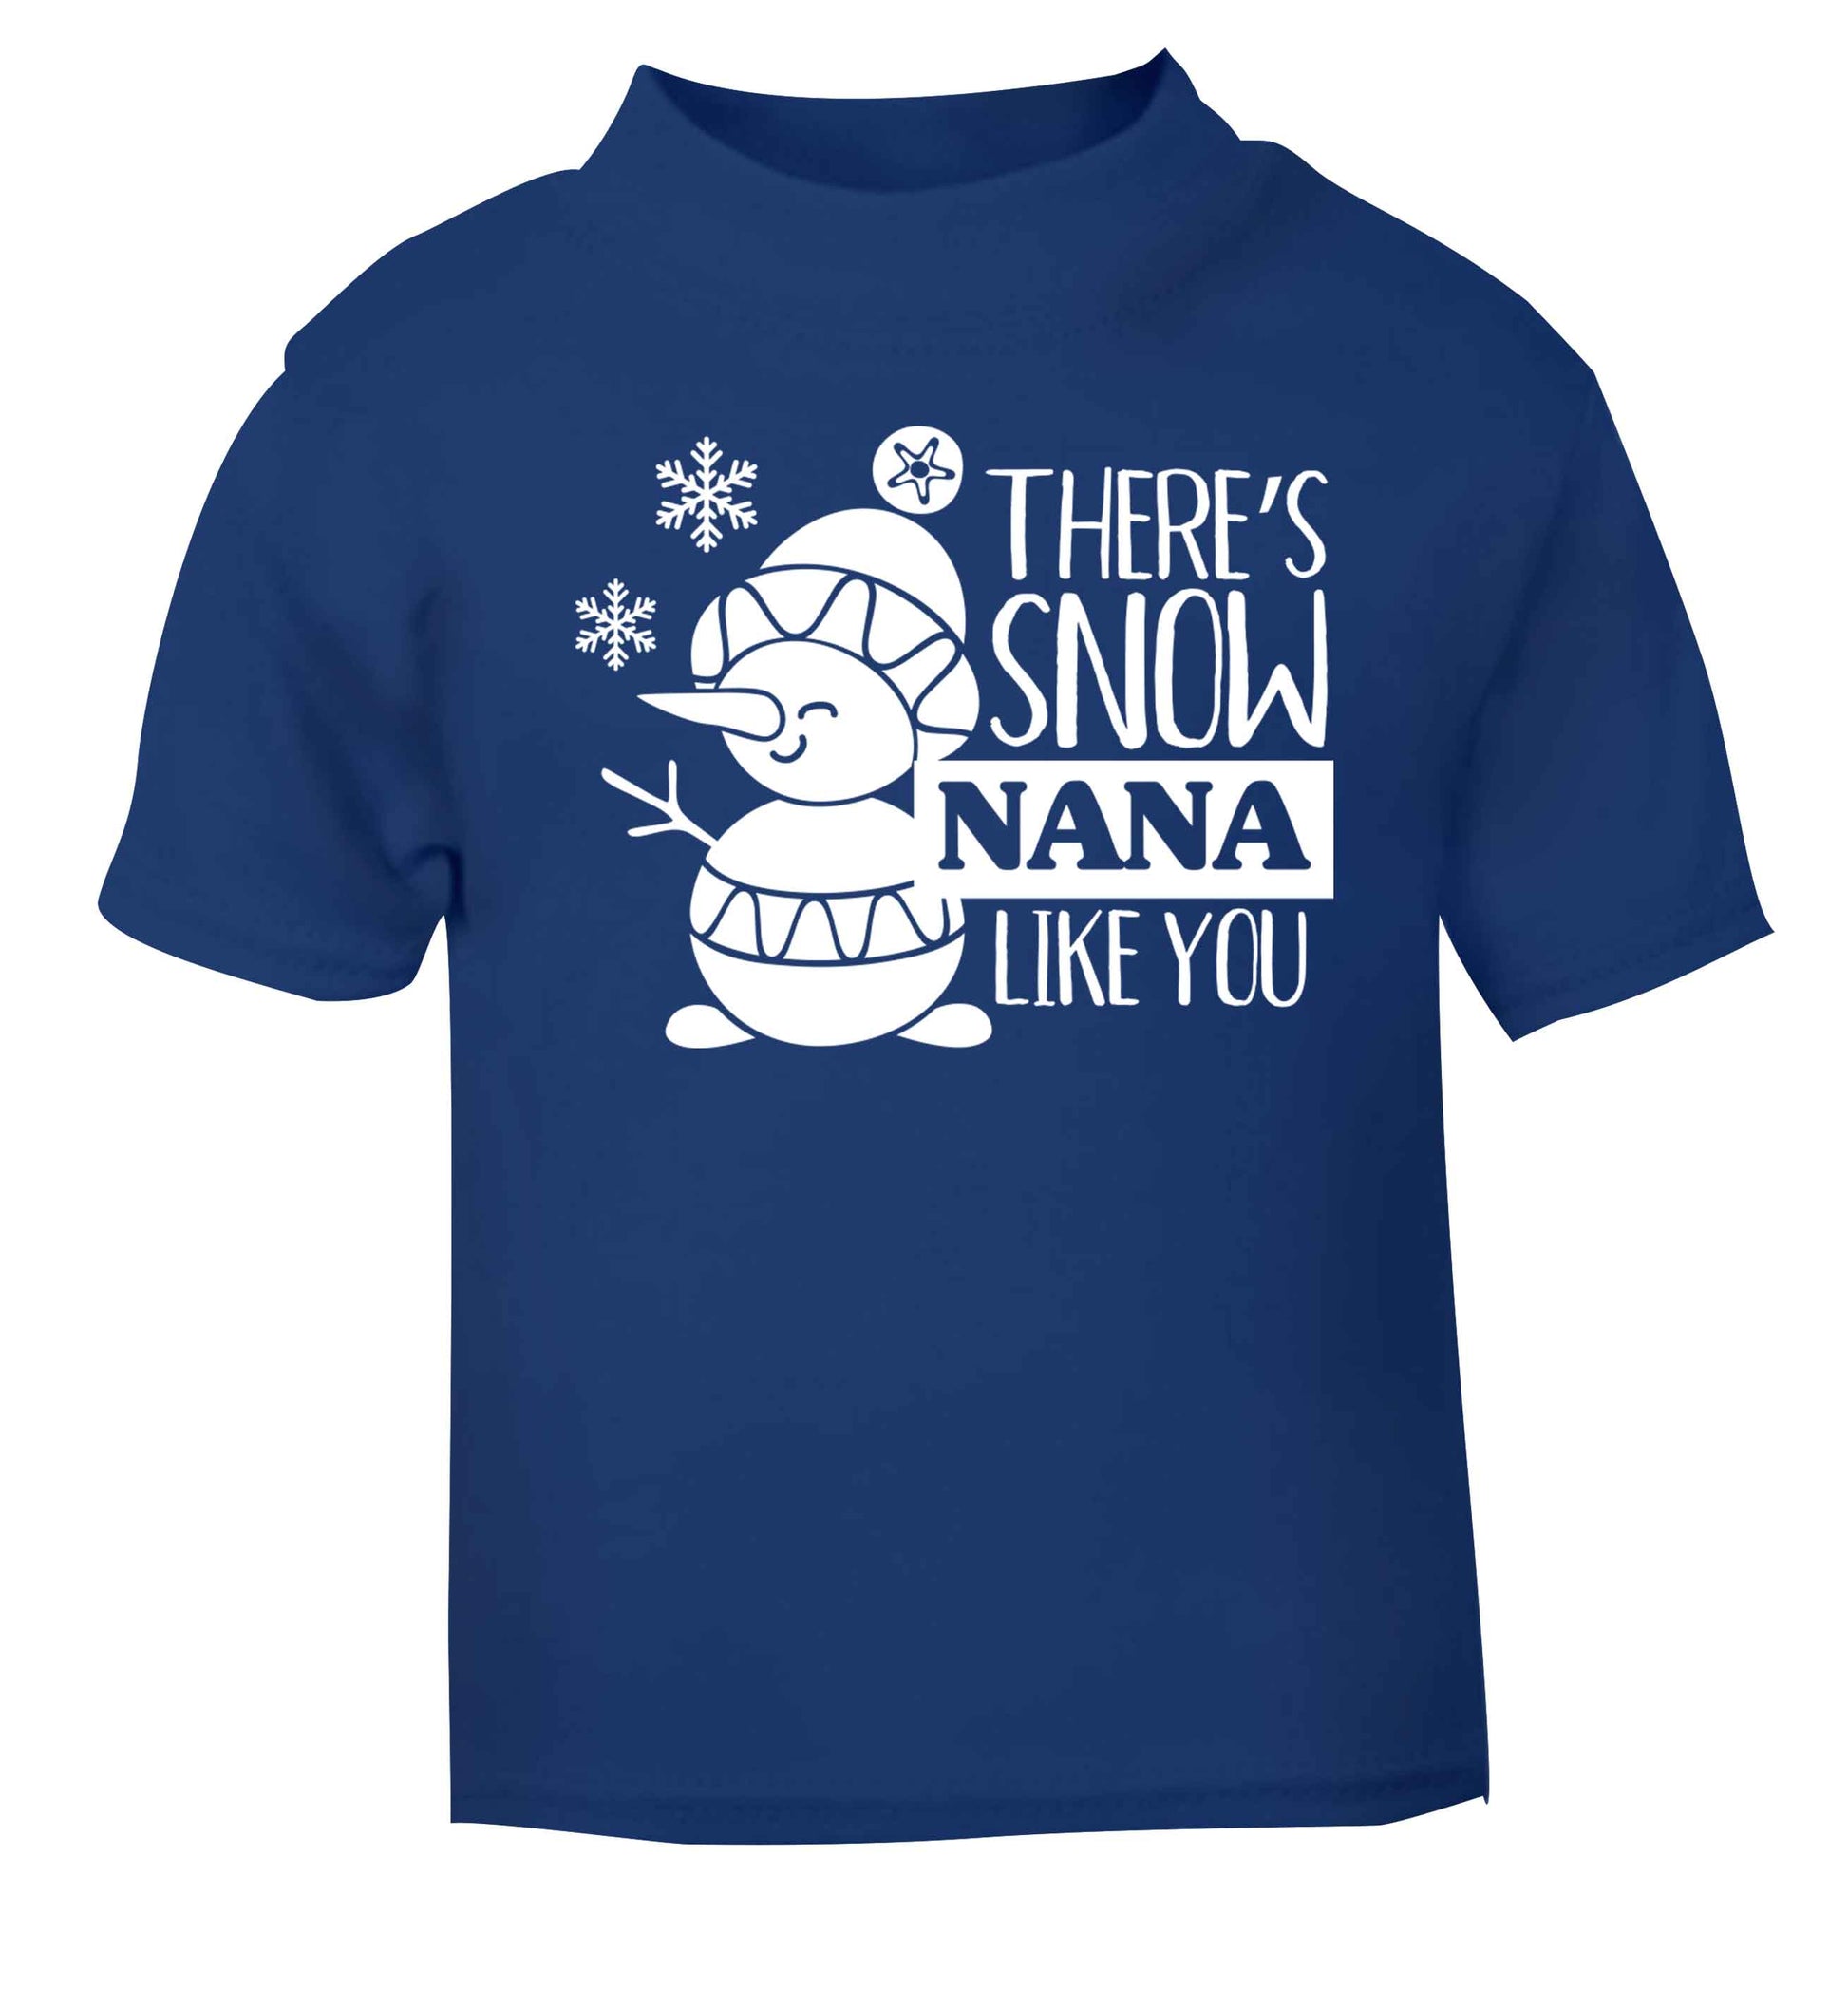 There's snow nana like you blue baby toddler Tshirt 2 Years